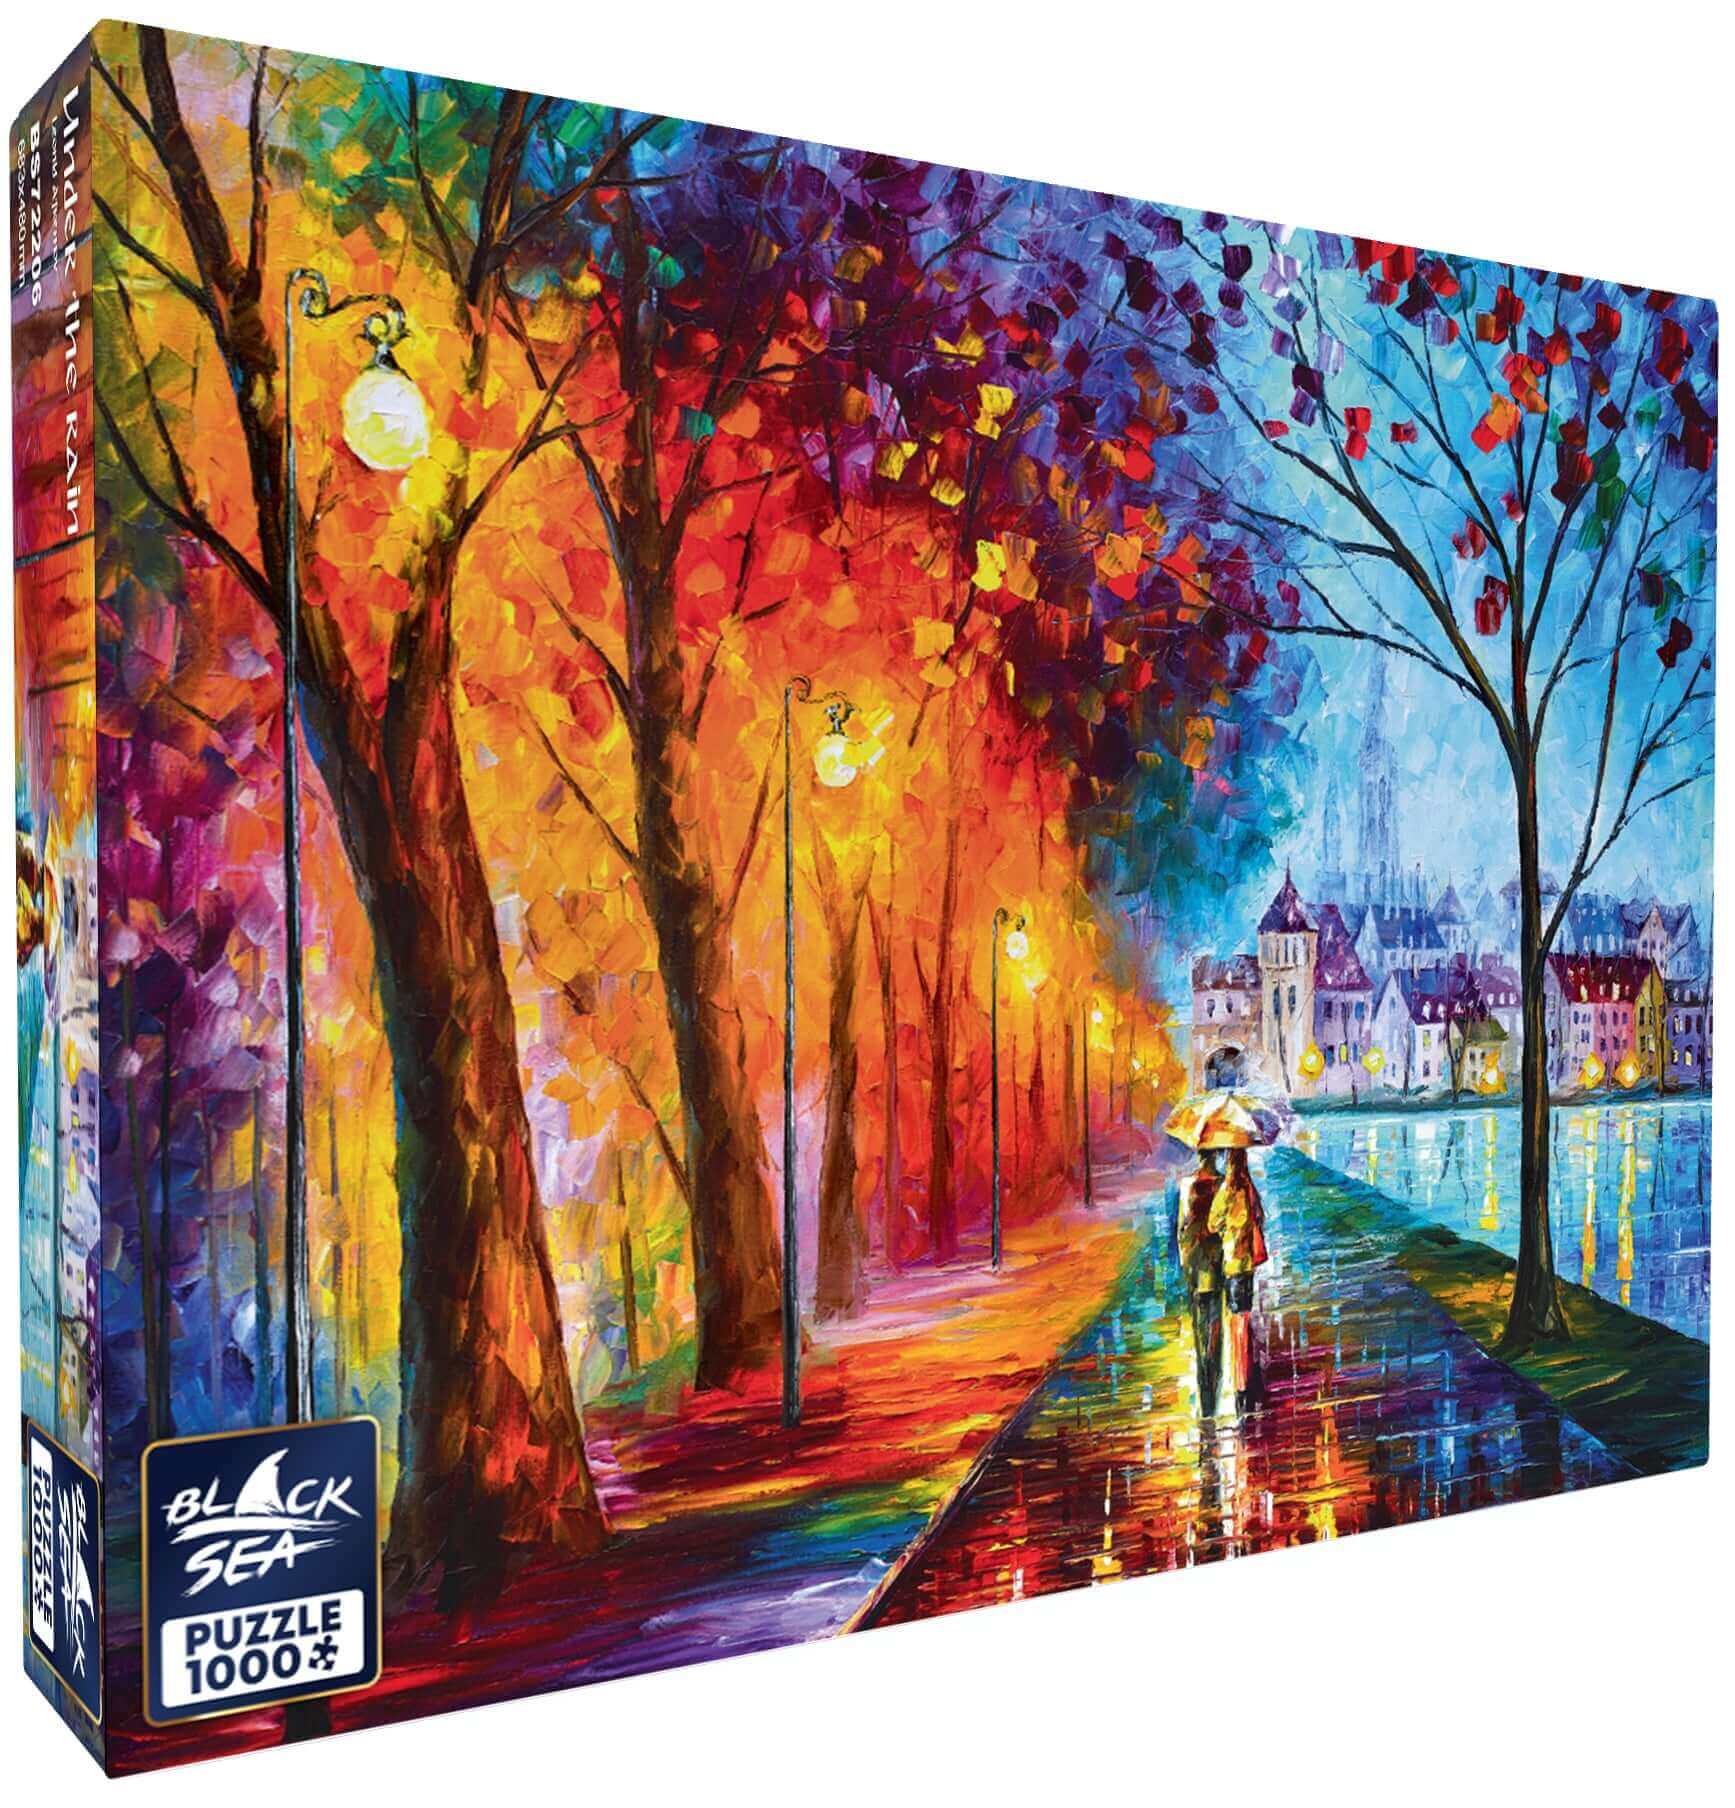 Puzzle Black Sea Premium 1000 pieces - Under the Rain, Leonid Afremov represents autumn as never before. It is colourful and warm, and the whole world is reflected in the streets, washed by the warm rain. Afremov’s unique style using a palette knife with